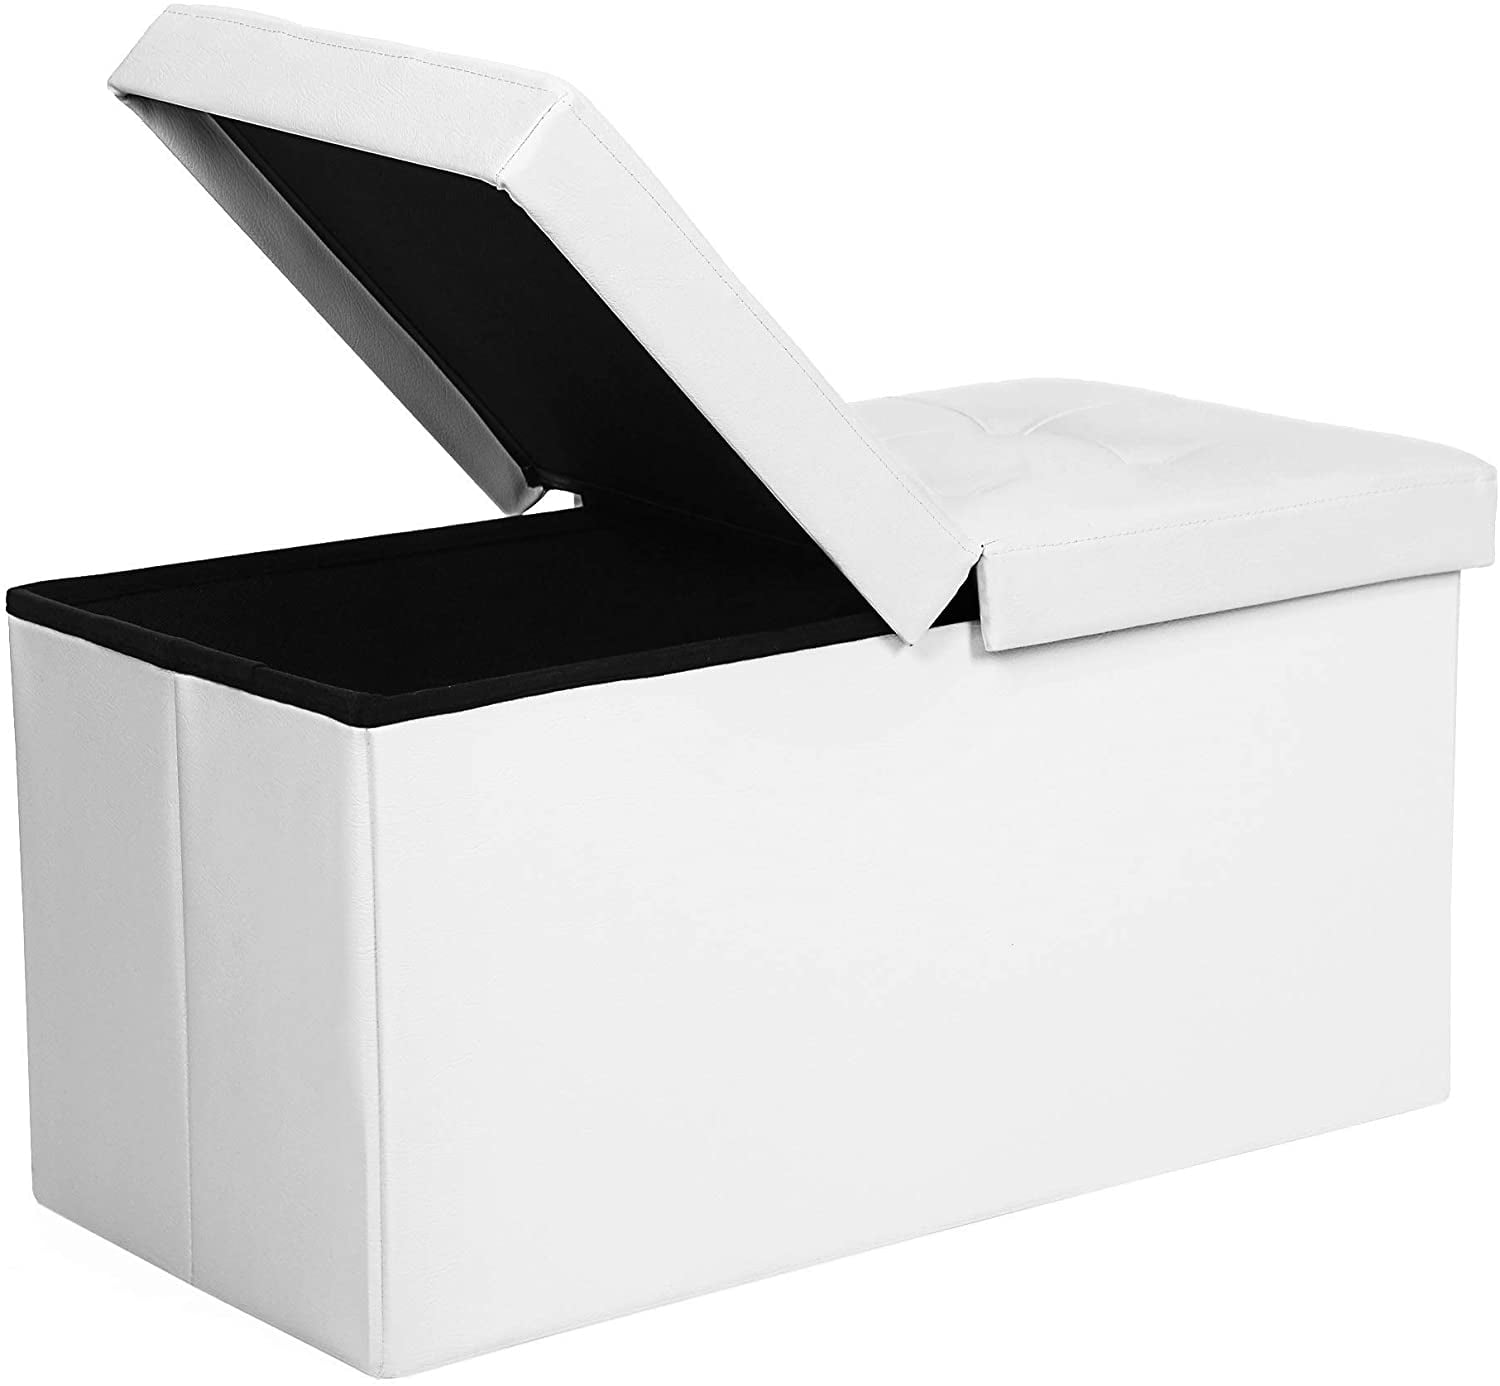 SONGMICS 30" Folding Storage Ottoman Bench with Flipping Lid, White